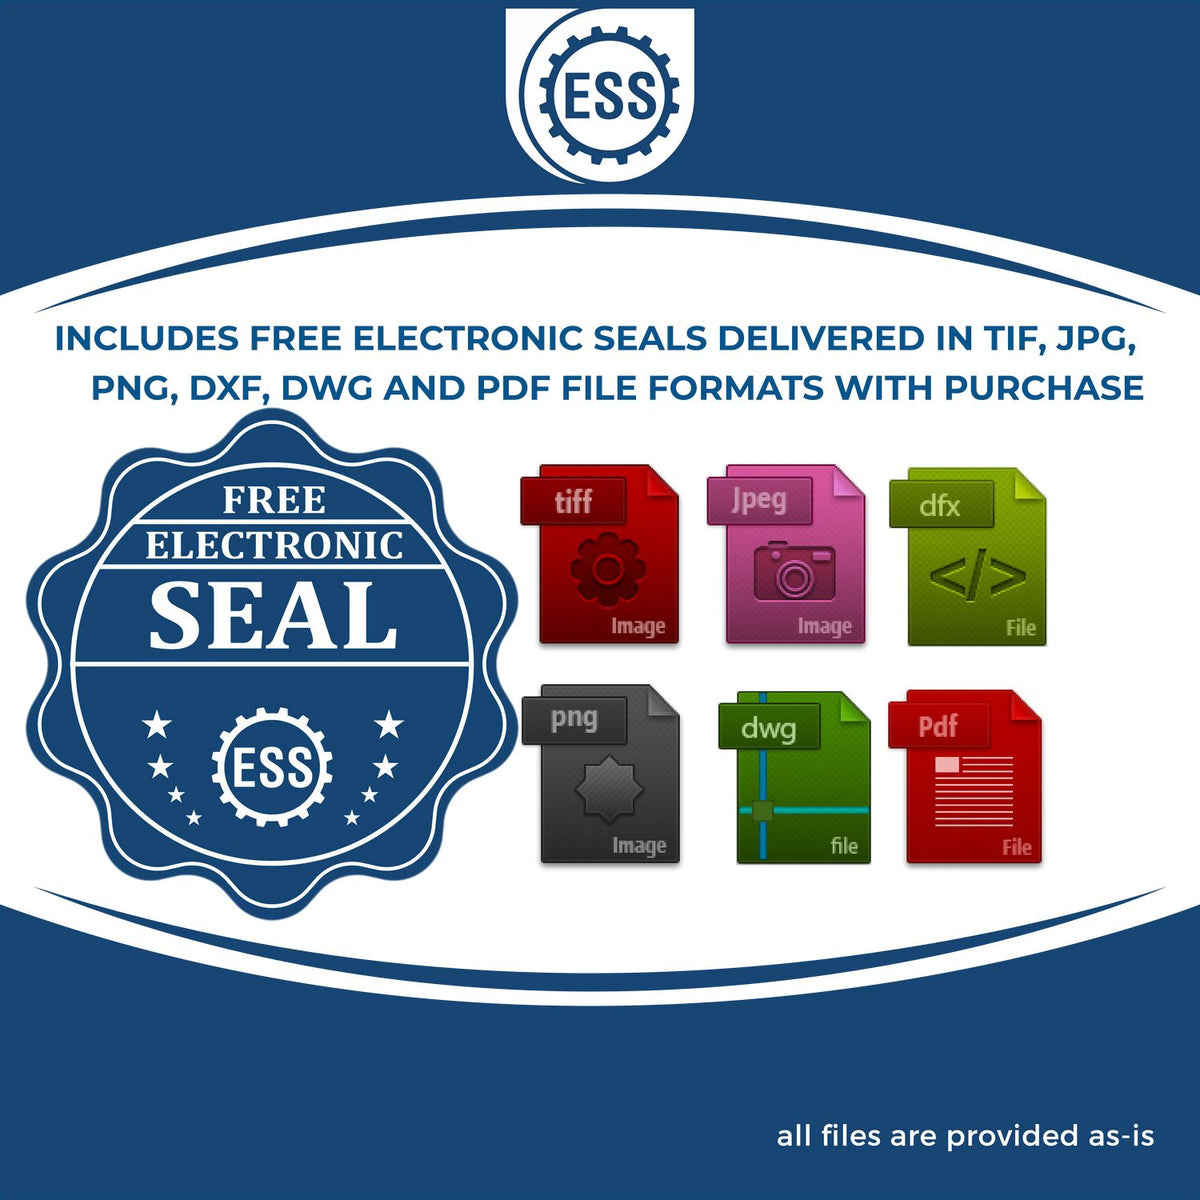 An infographic for the free electronic seal for the Hybrid Missouri Land Surveyor Seal illustrating the different file type icons such as DXF, DWG, TIF, JPG and PNG.